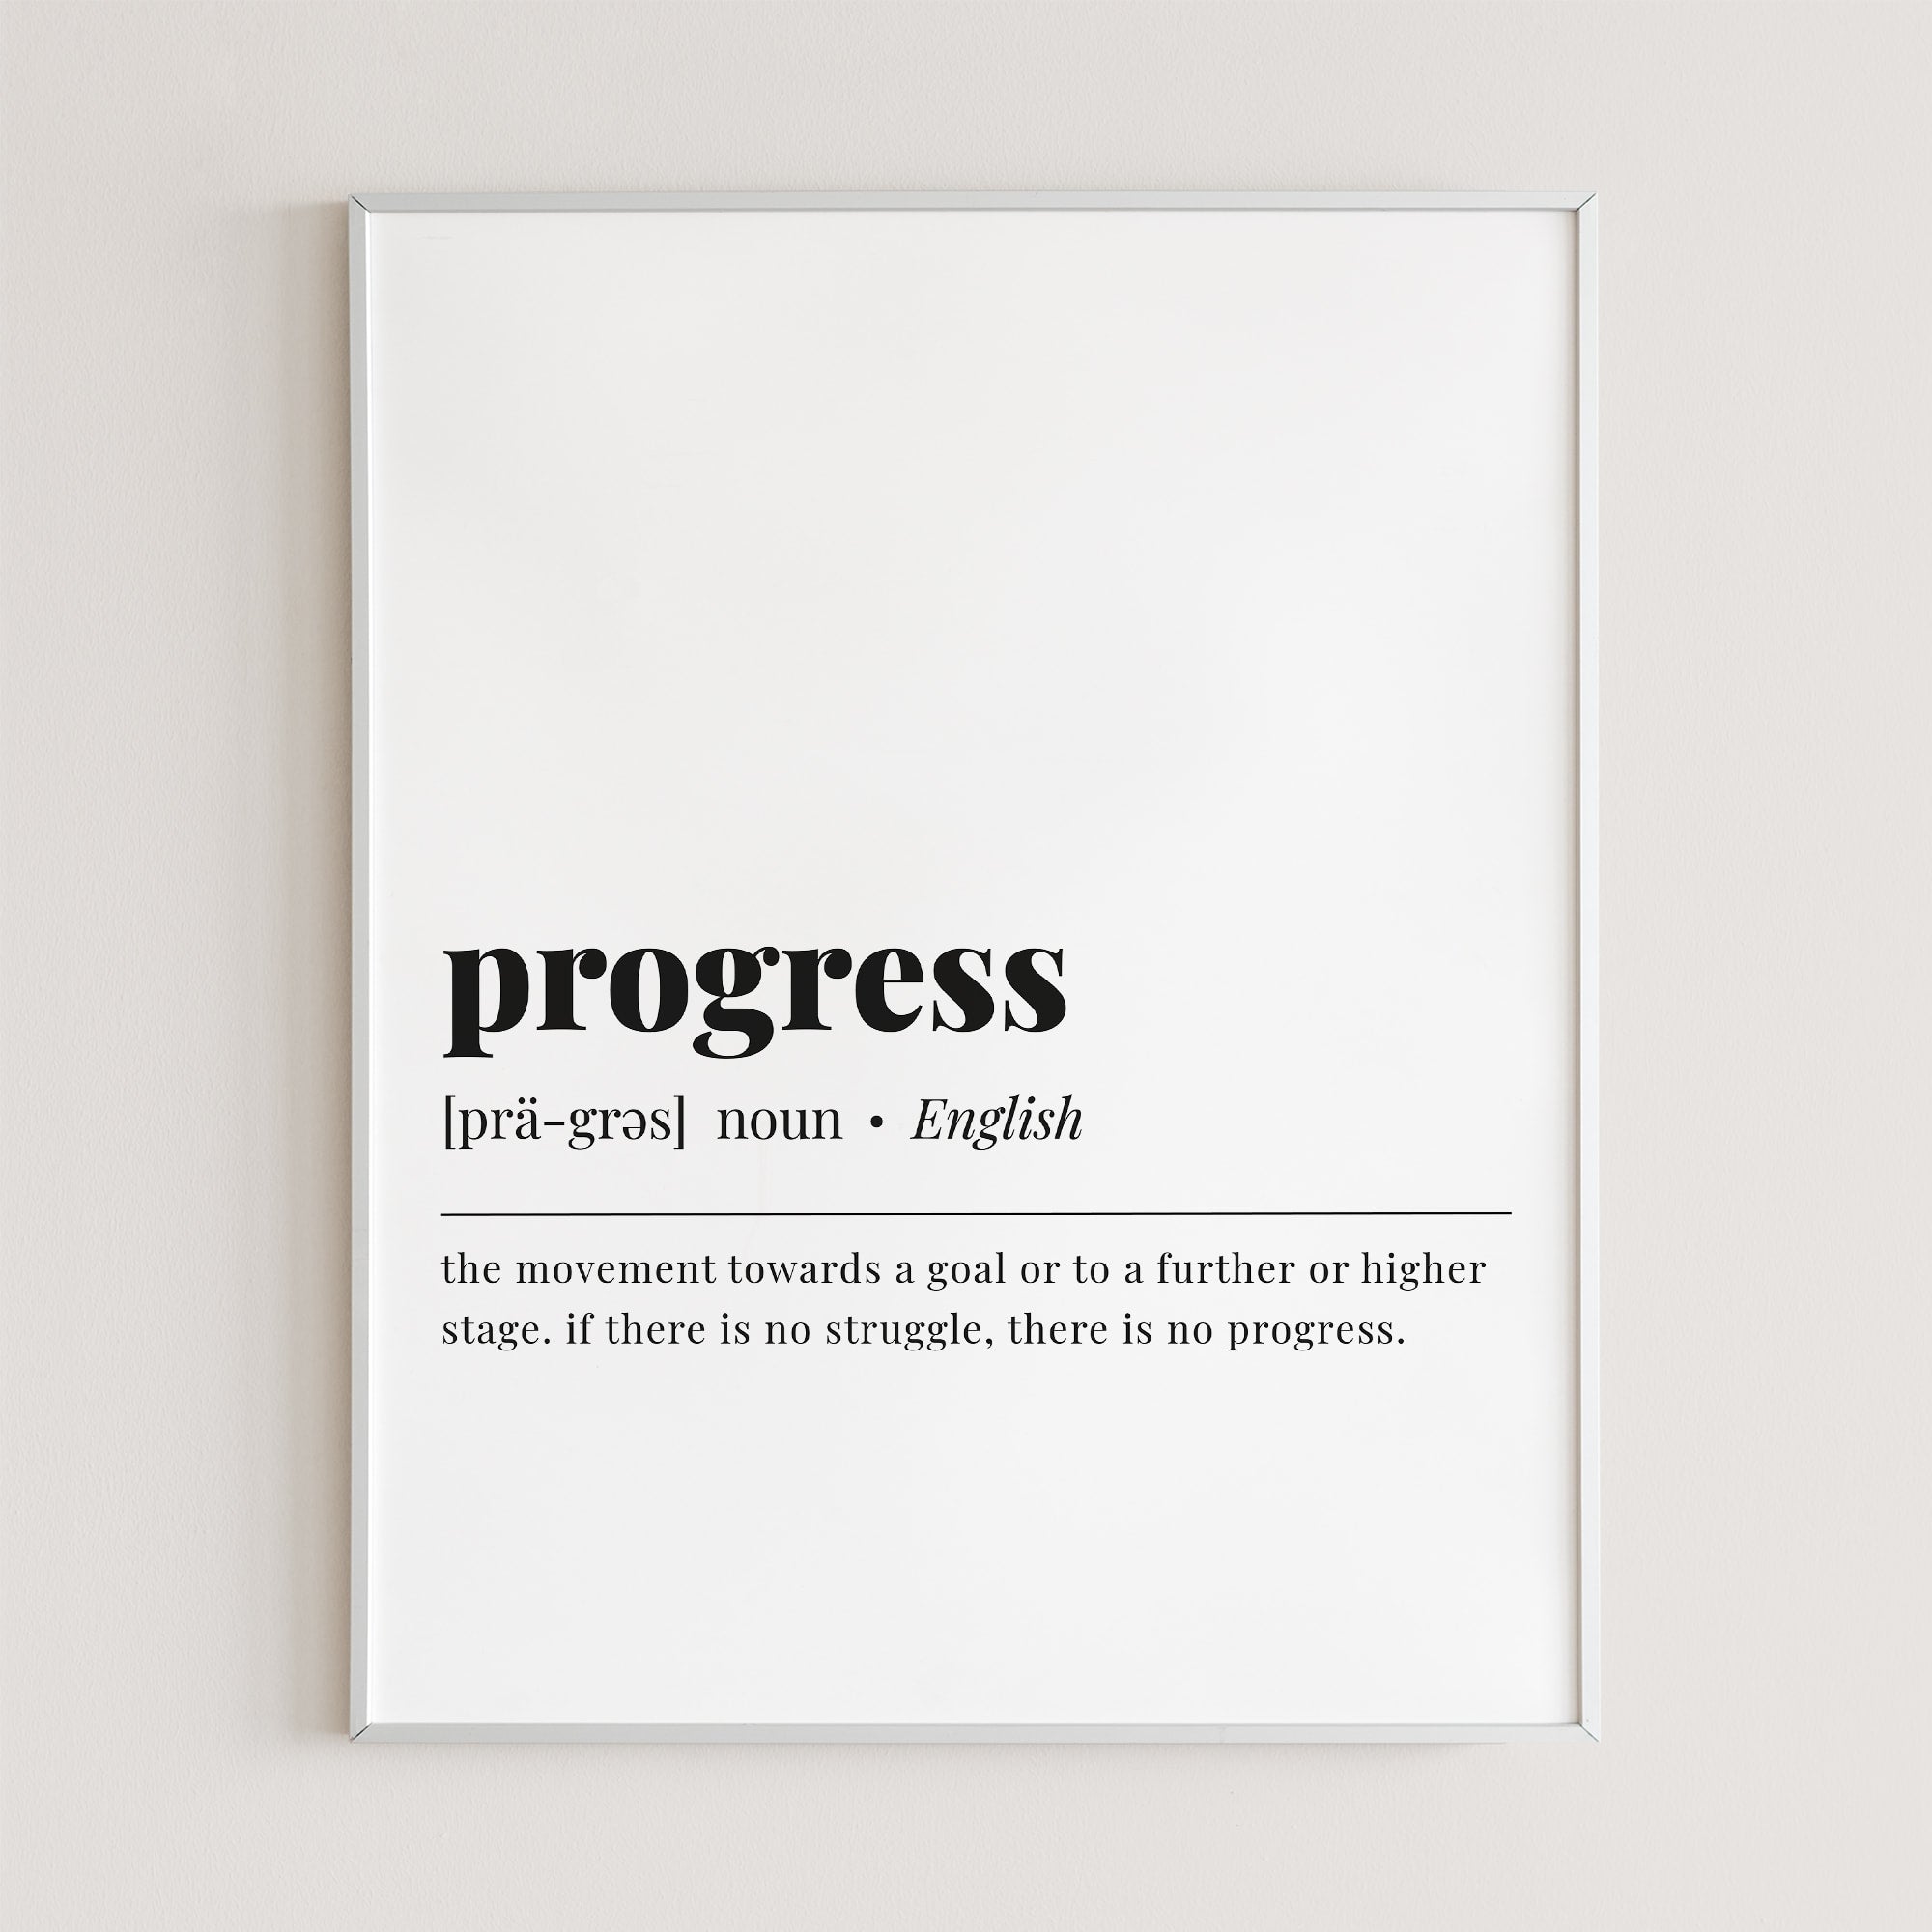 Progress Definition Print Instant Download by Littlesizzle